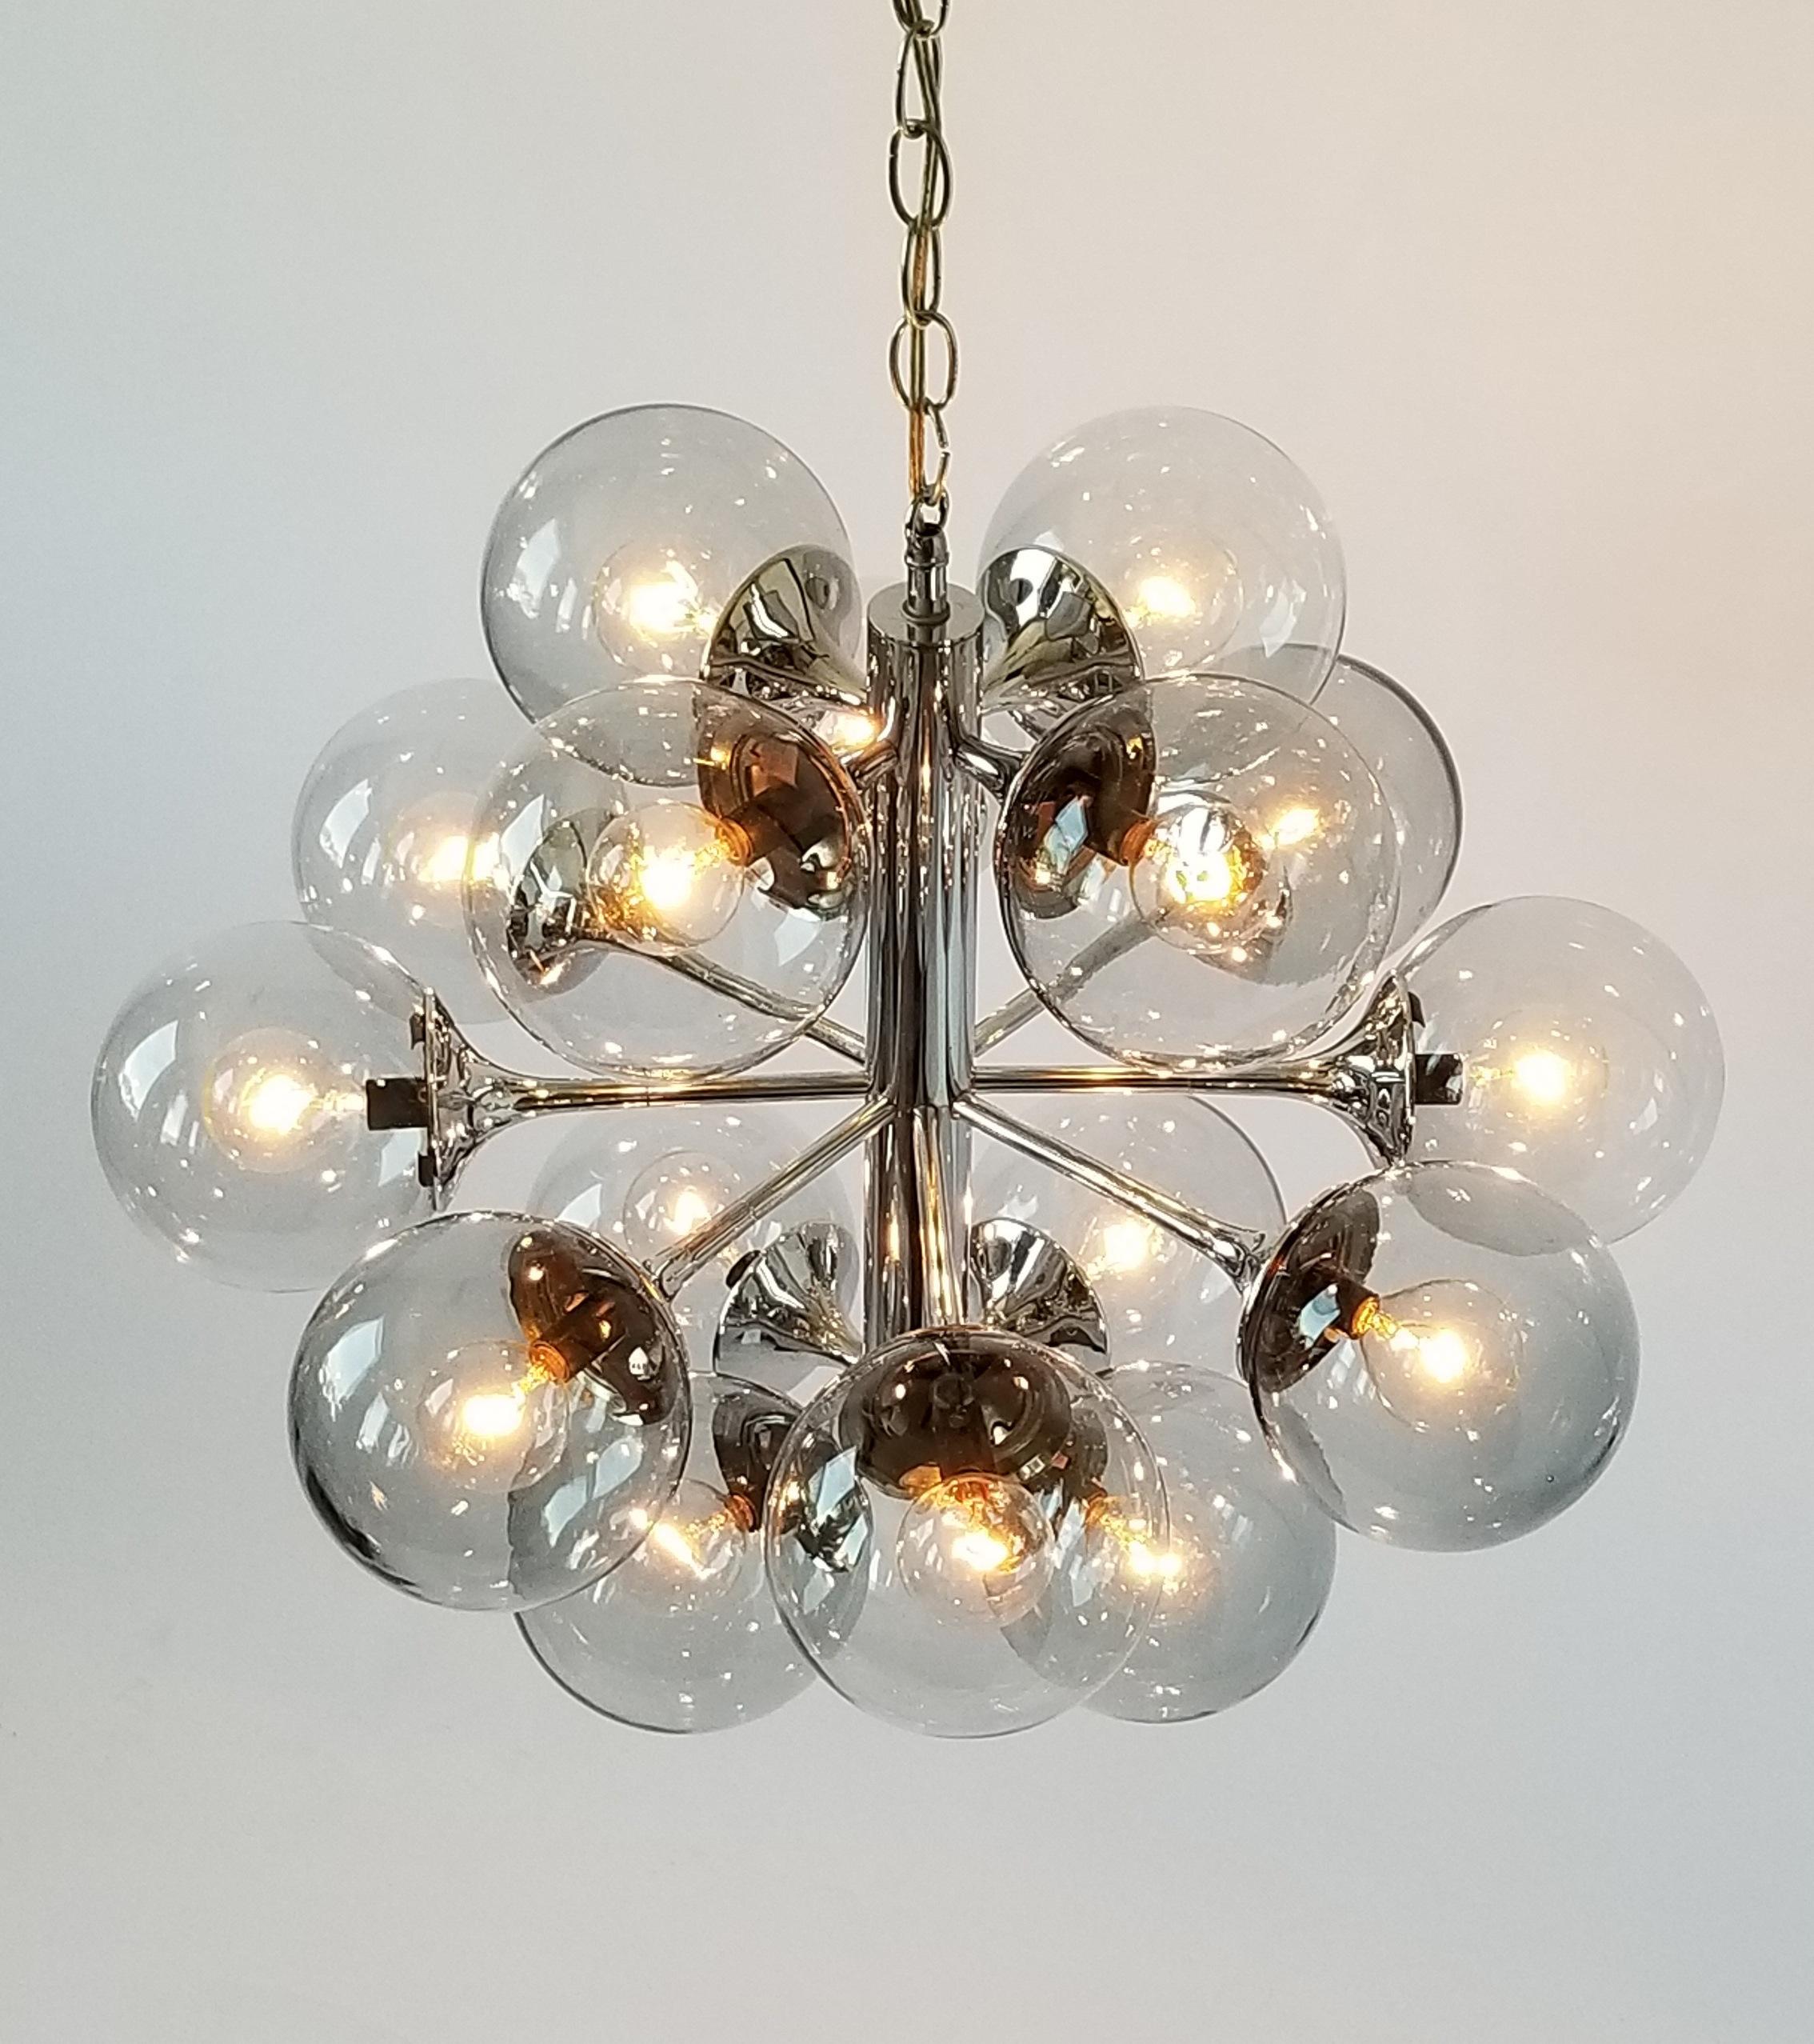 16 mouth blowed glass shade sitting on a deep chrome finish structure from Lightolier. 

Each shade measure 5 in. diameter. 

Solid, well made construction. 

Use 16 candelabra E12 size lightbulb rated at 40 watt max. 

Chain length is 22 inches for